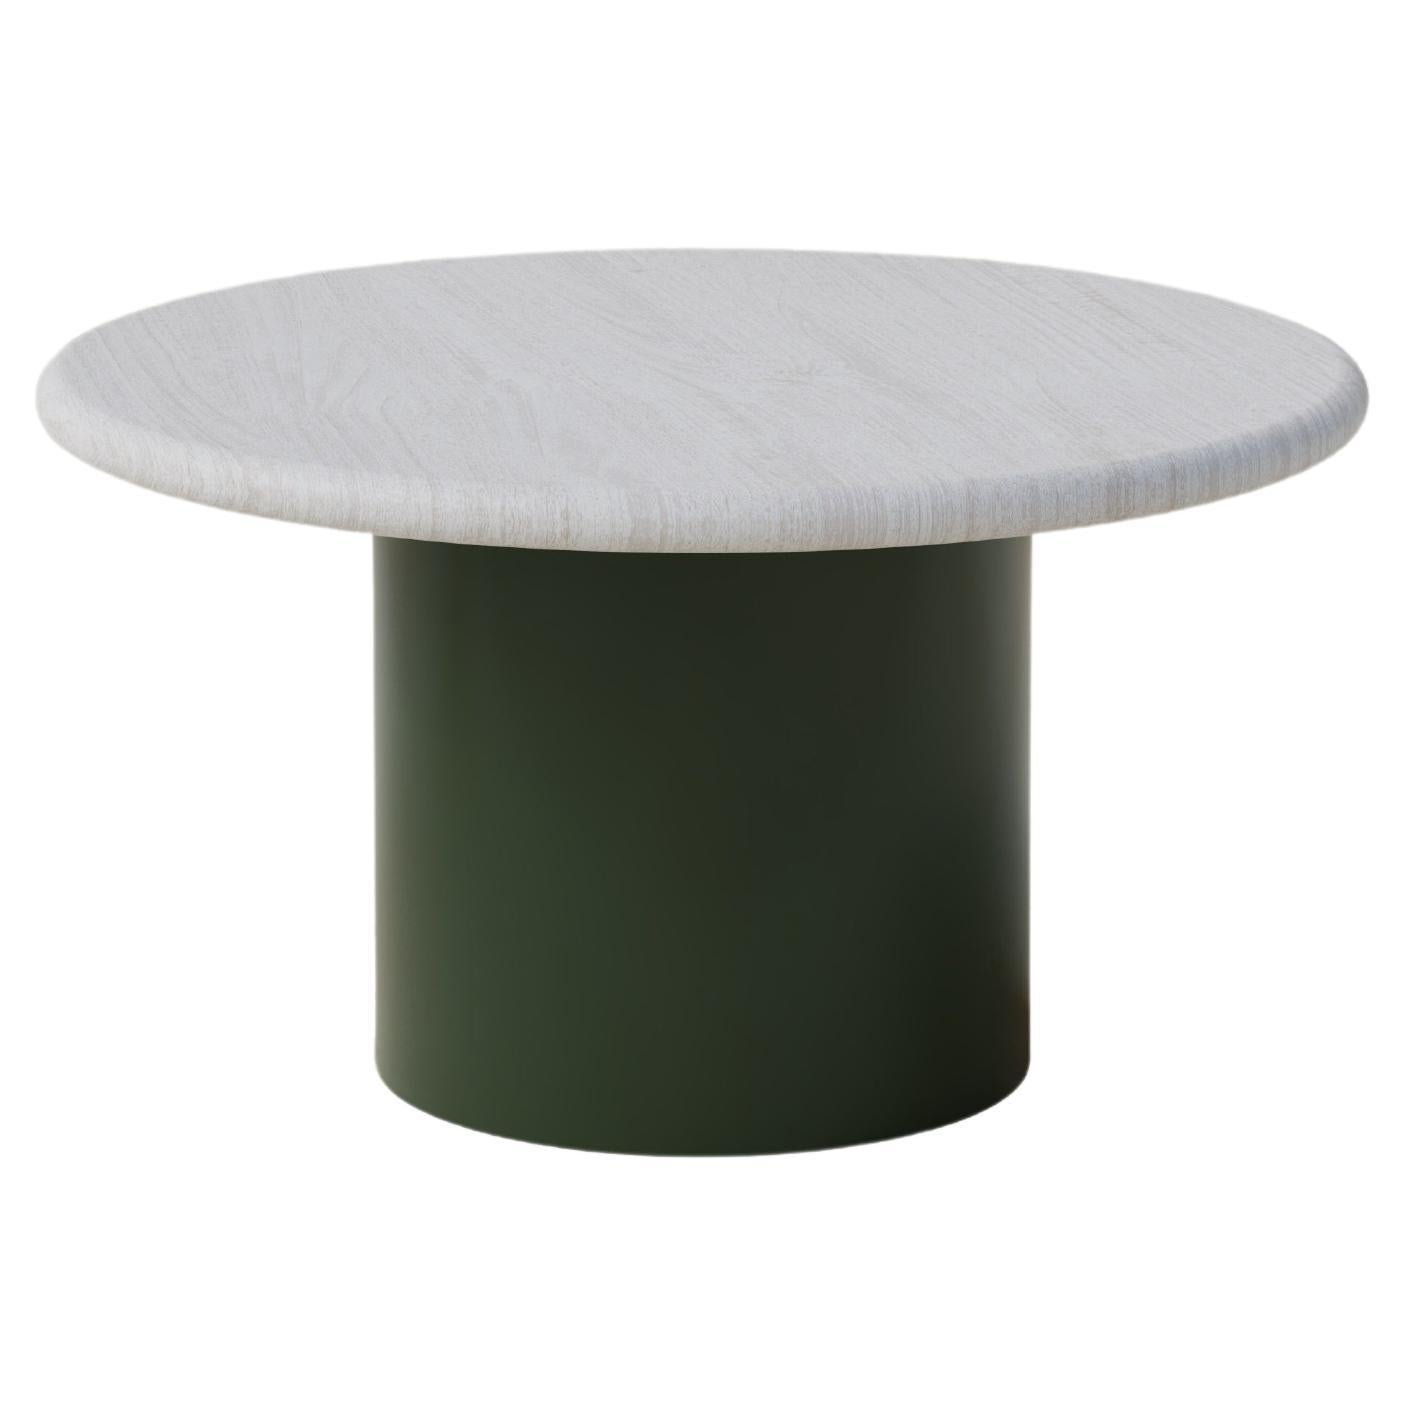 Raindrop Coffee Table, 600, White Oak / Moss Green For Sale